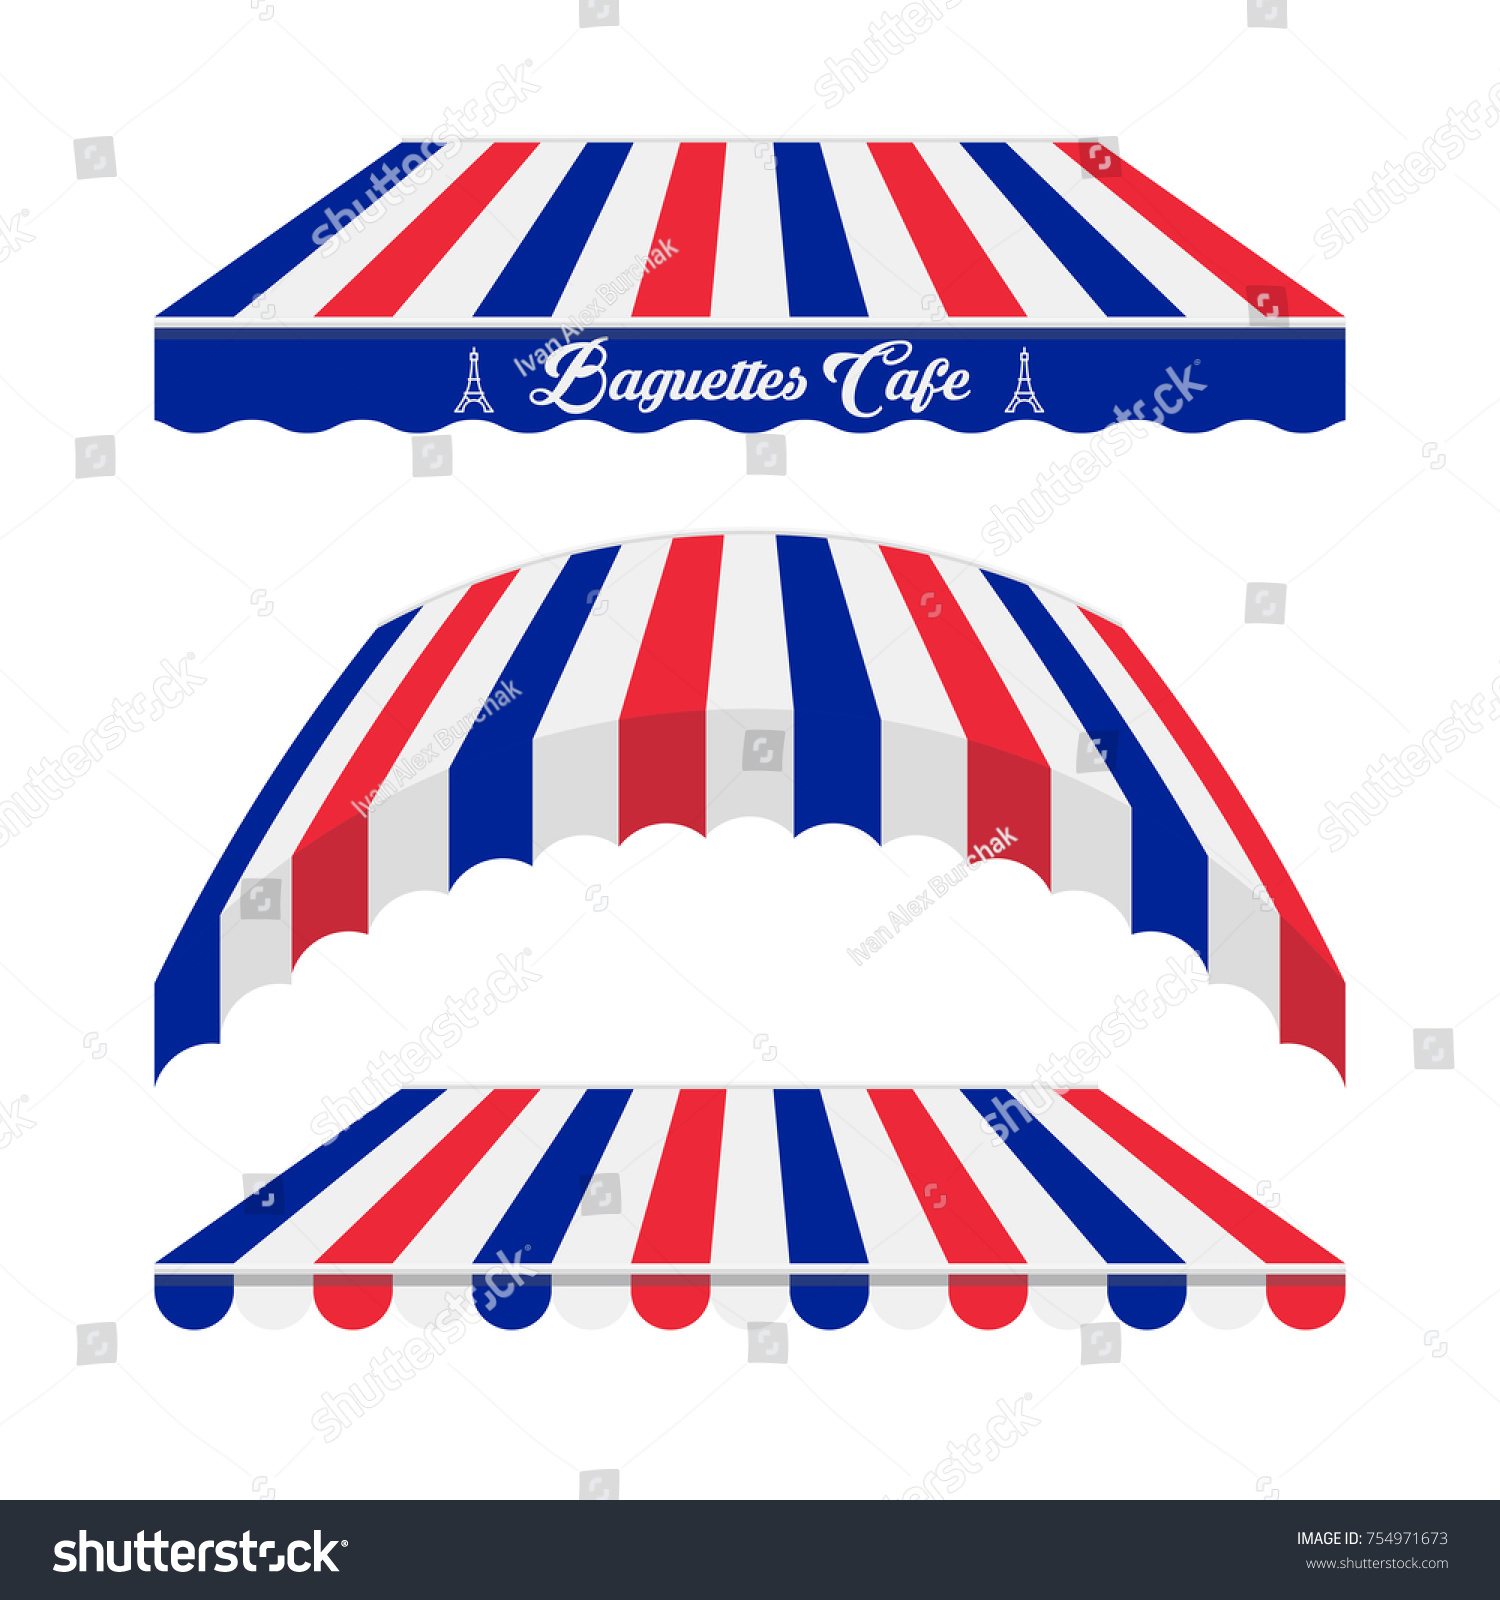 French Food Drink Awning Tent Vector Stock Vector Royalty Free